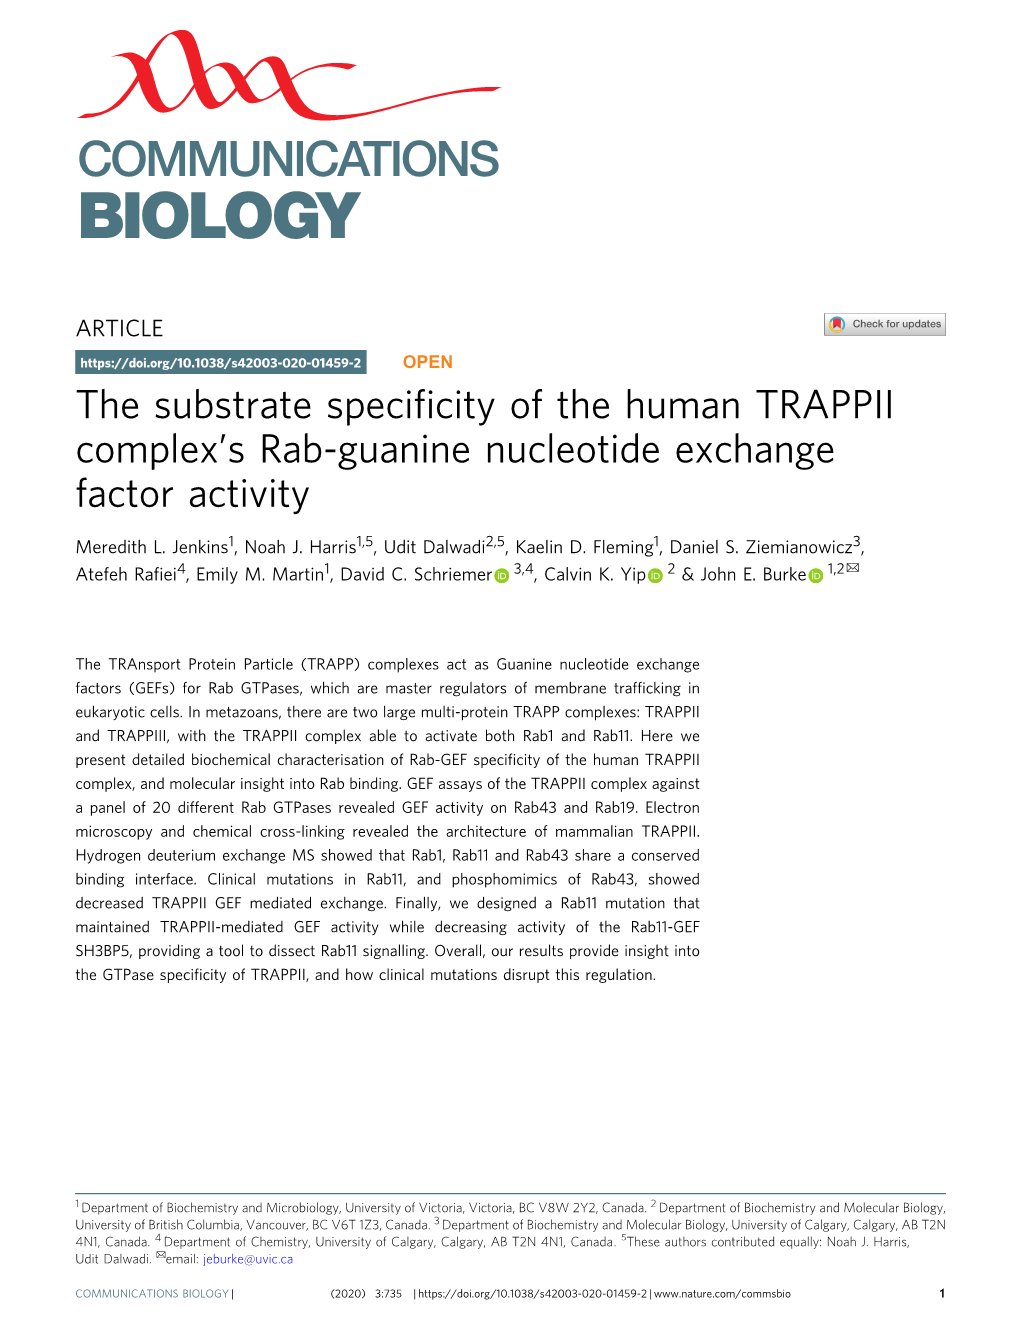 The Substrate Specificity of the Human TRAPPII Complexâ€™S Rab